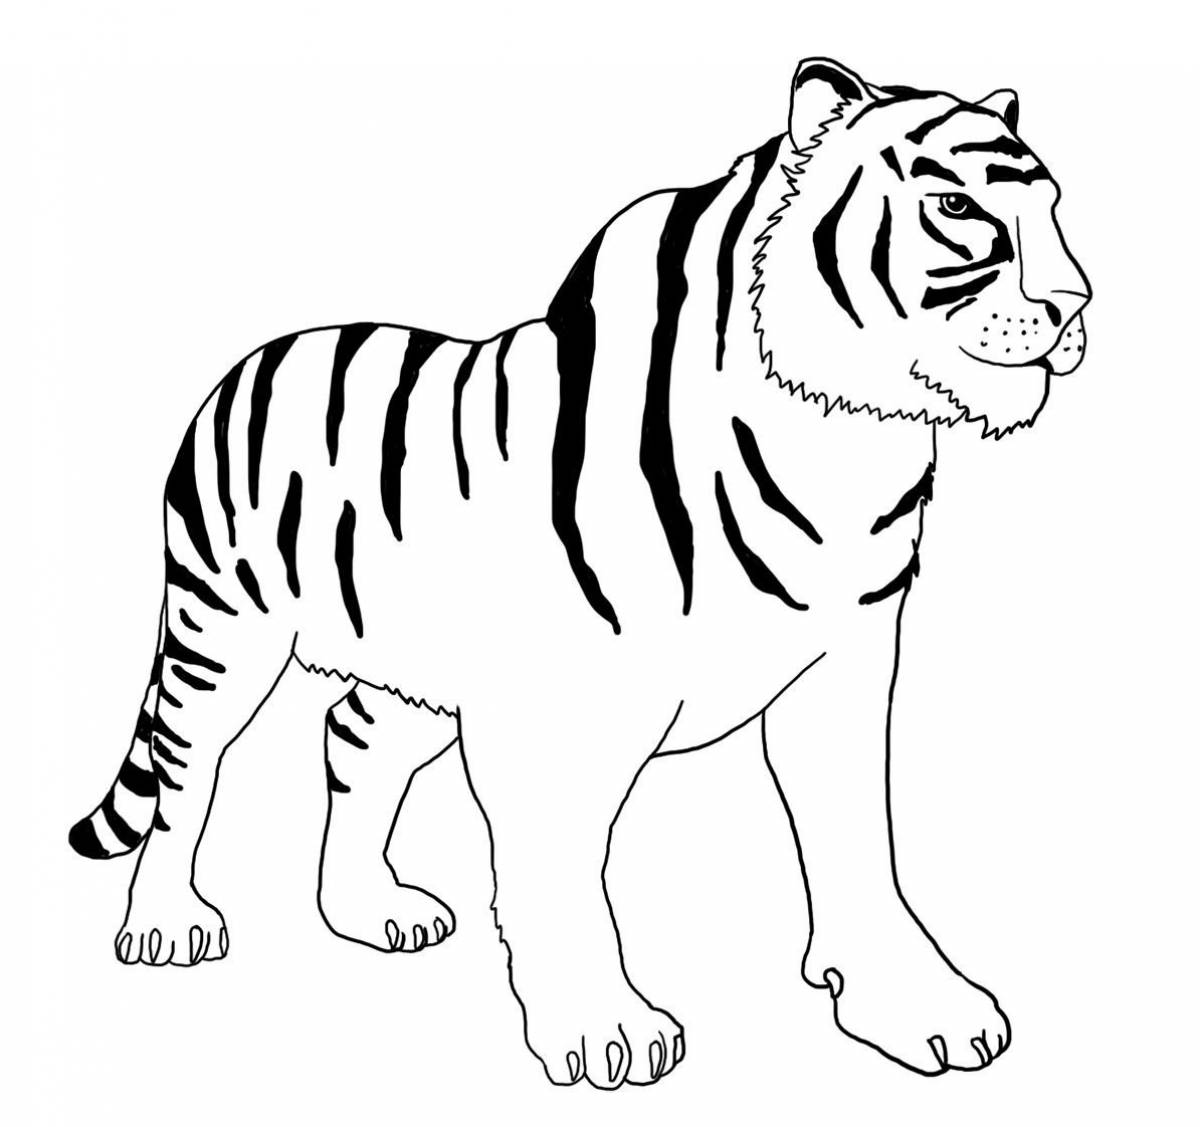 Glorious tiger coloring for children 3-4 years old